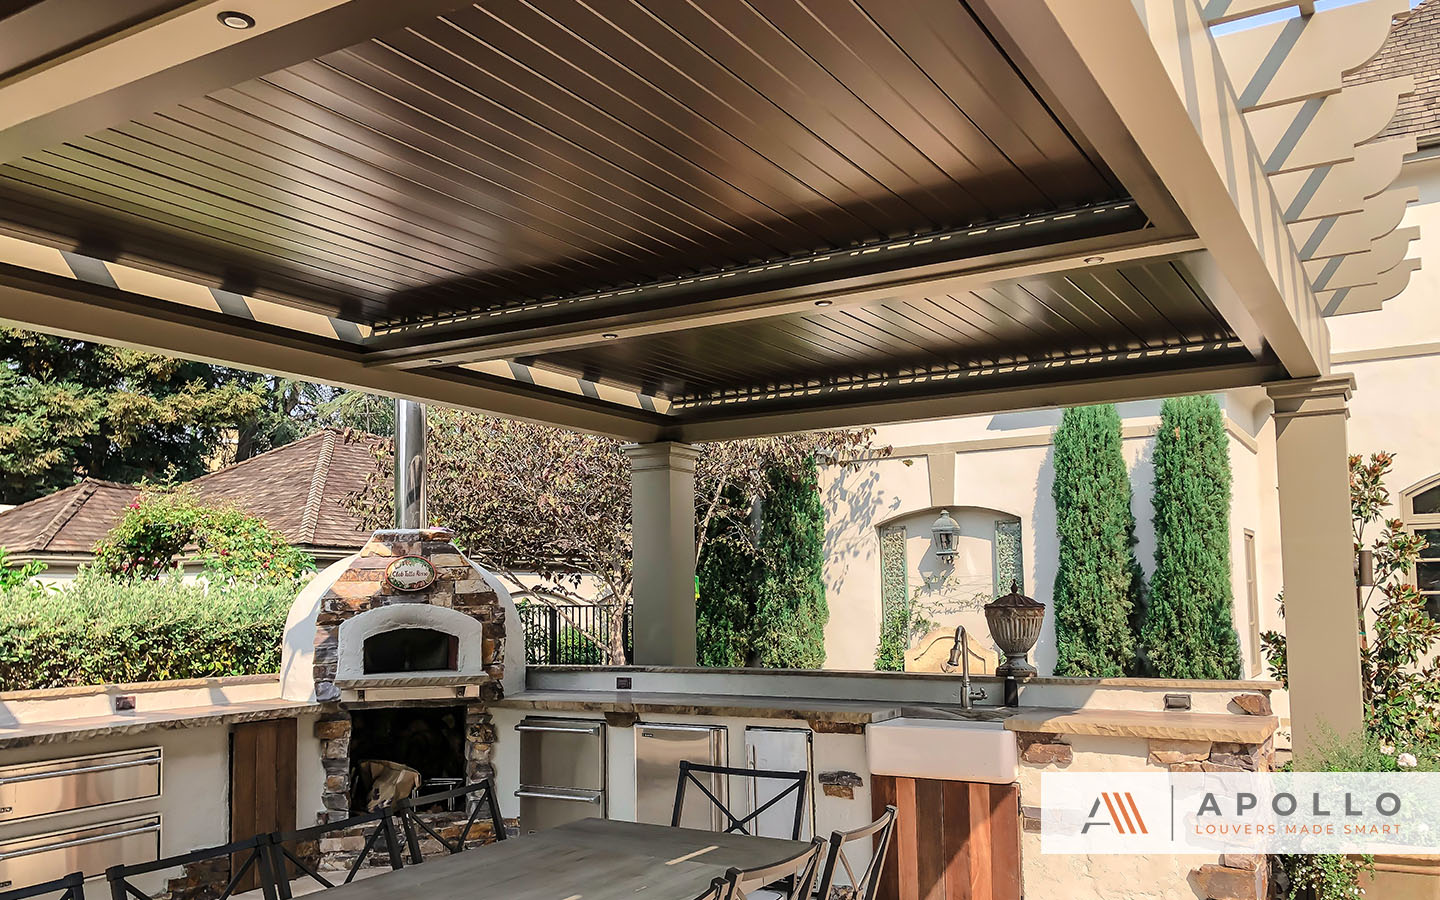 Apollo louver system integrated into custom framing and columns over a beautiful outdoor cooking and dining area.